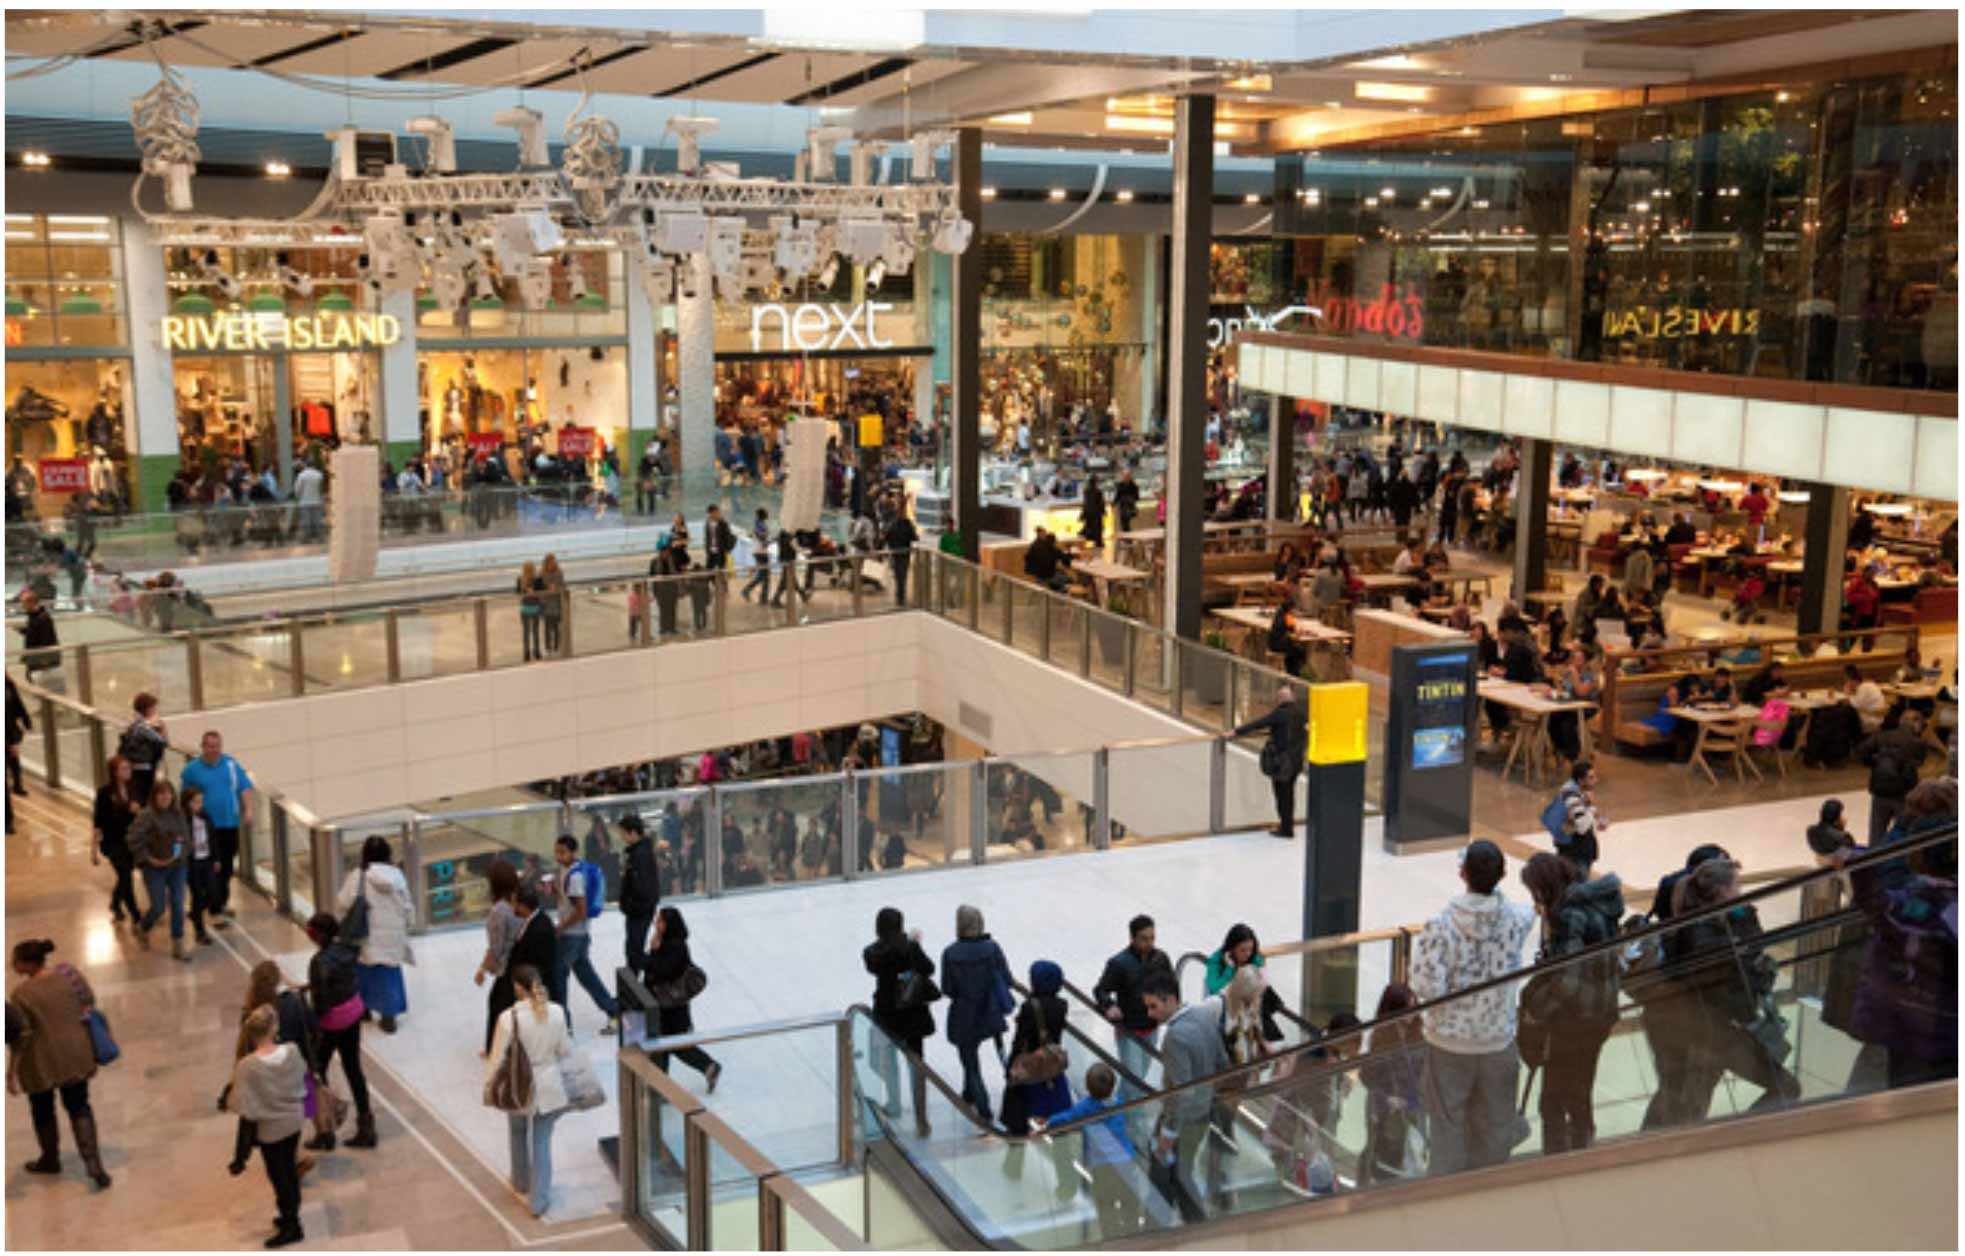 Westfield Shopping Centre London - A Guide